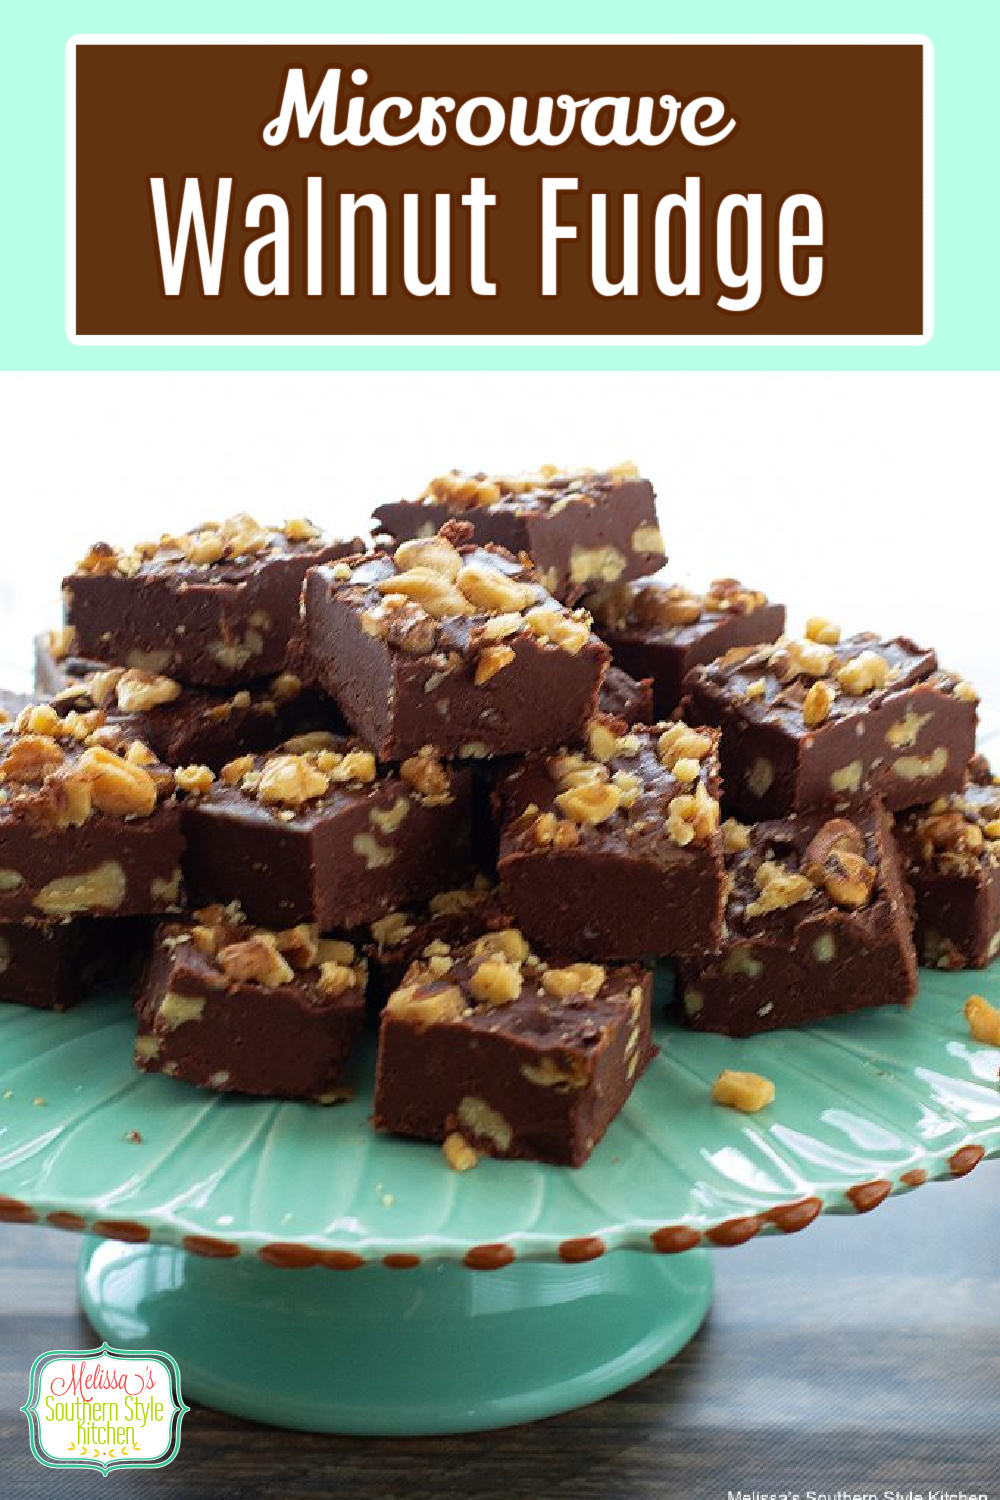 Whip-up a batch of chocolate walnut Microwave Fudge in no time flat #fudgerecipes #chocolate #fudge #microwavefudge #walnutfudge #easyfudgerecipes #chocolatefudge